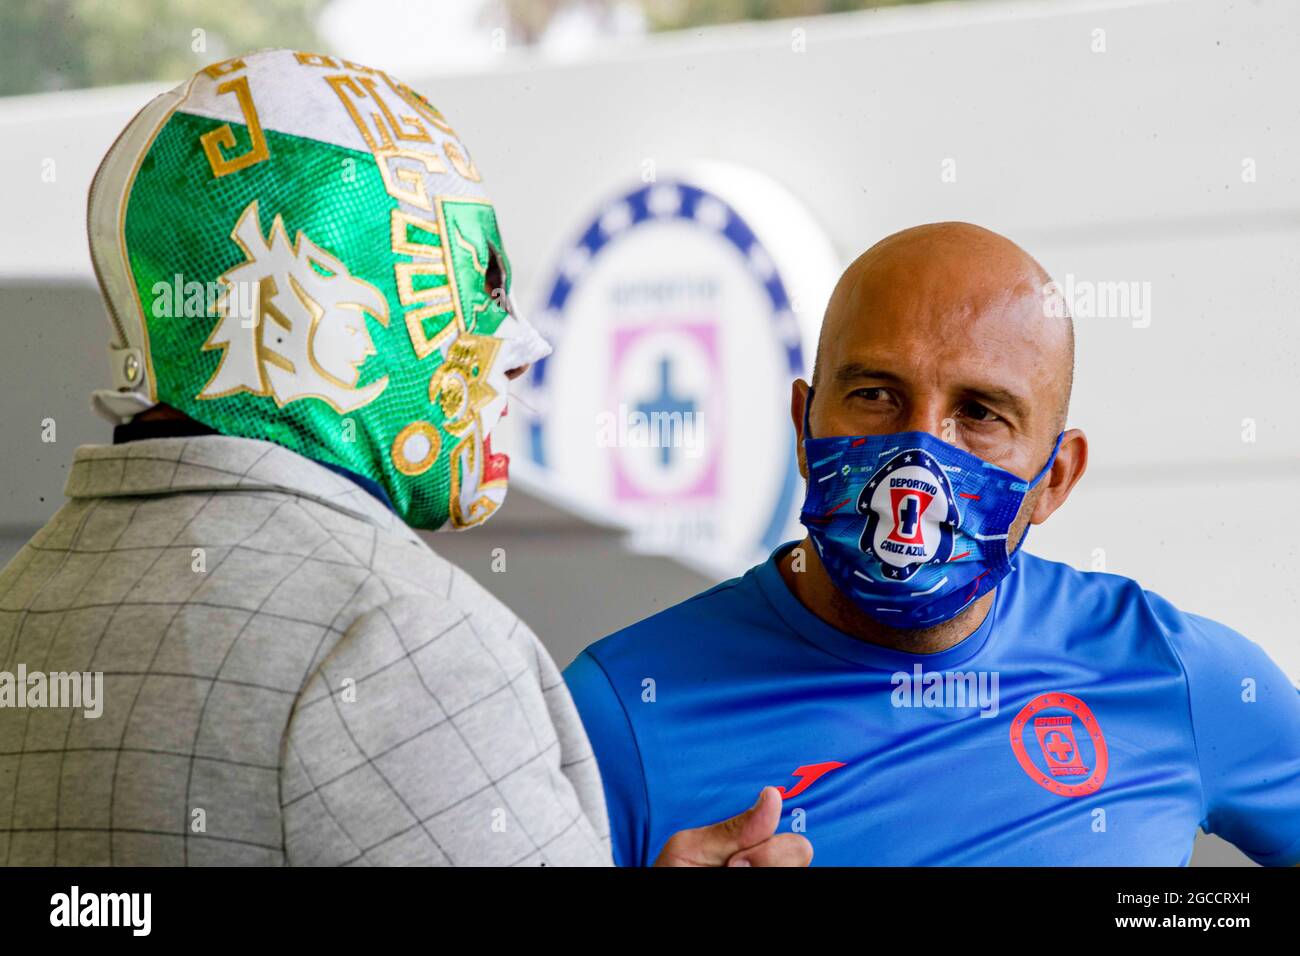 MEXICO CITY, MEXICO - AUGUST 4: Wrestler Dr Wagner meets with Oscar Perez  at press conference at La Noria, high performance center of the Cruz Azul football team on August 4, 2021 in Mexico City, Mexico. Credit: Ricardo Flores/Eyepix Group/The Photo Access Stock Photo